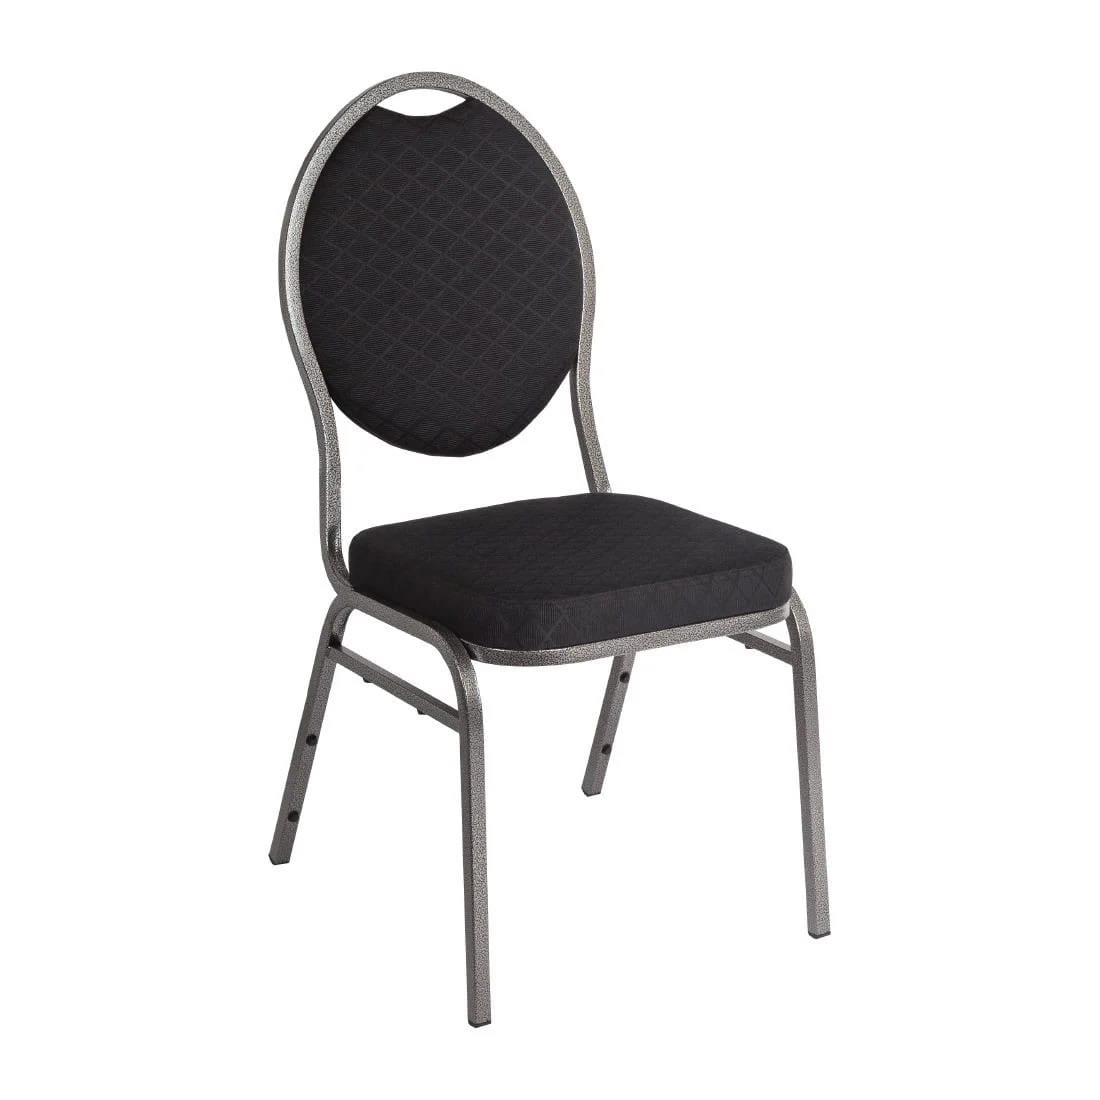 Brelone Set Of 4 Oval Chairs Black